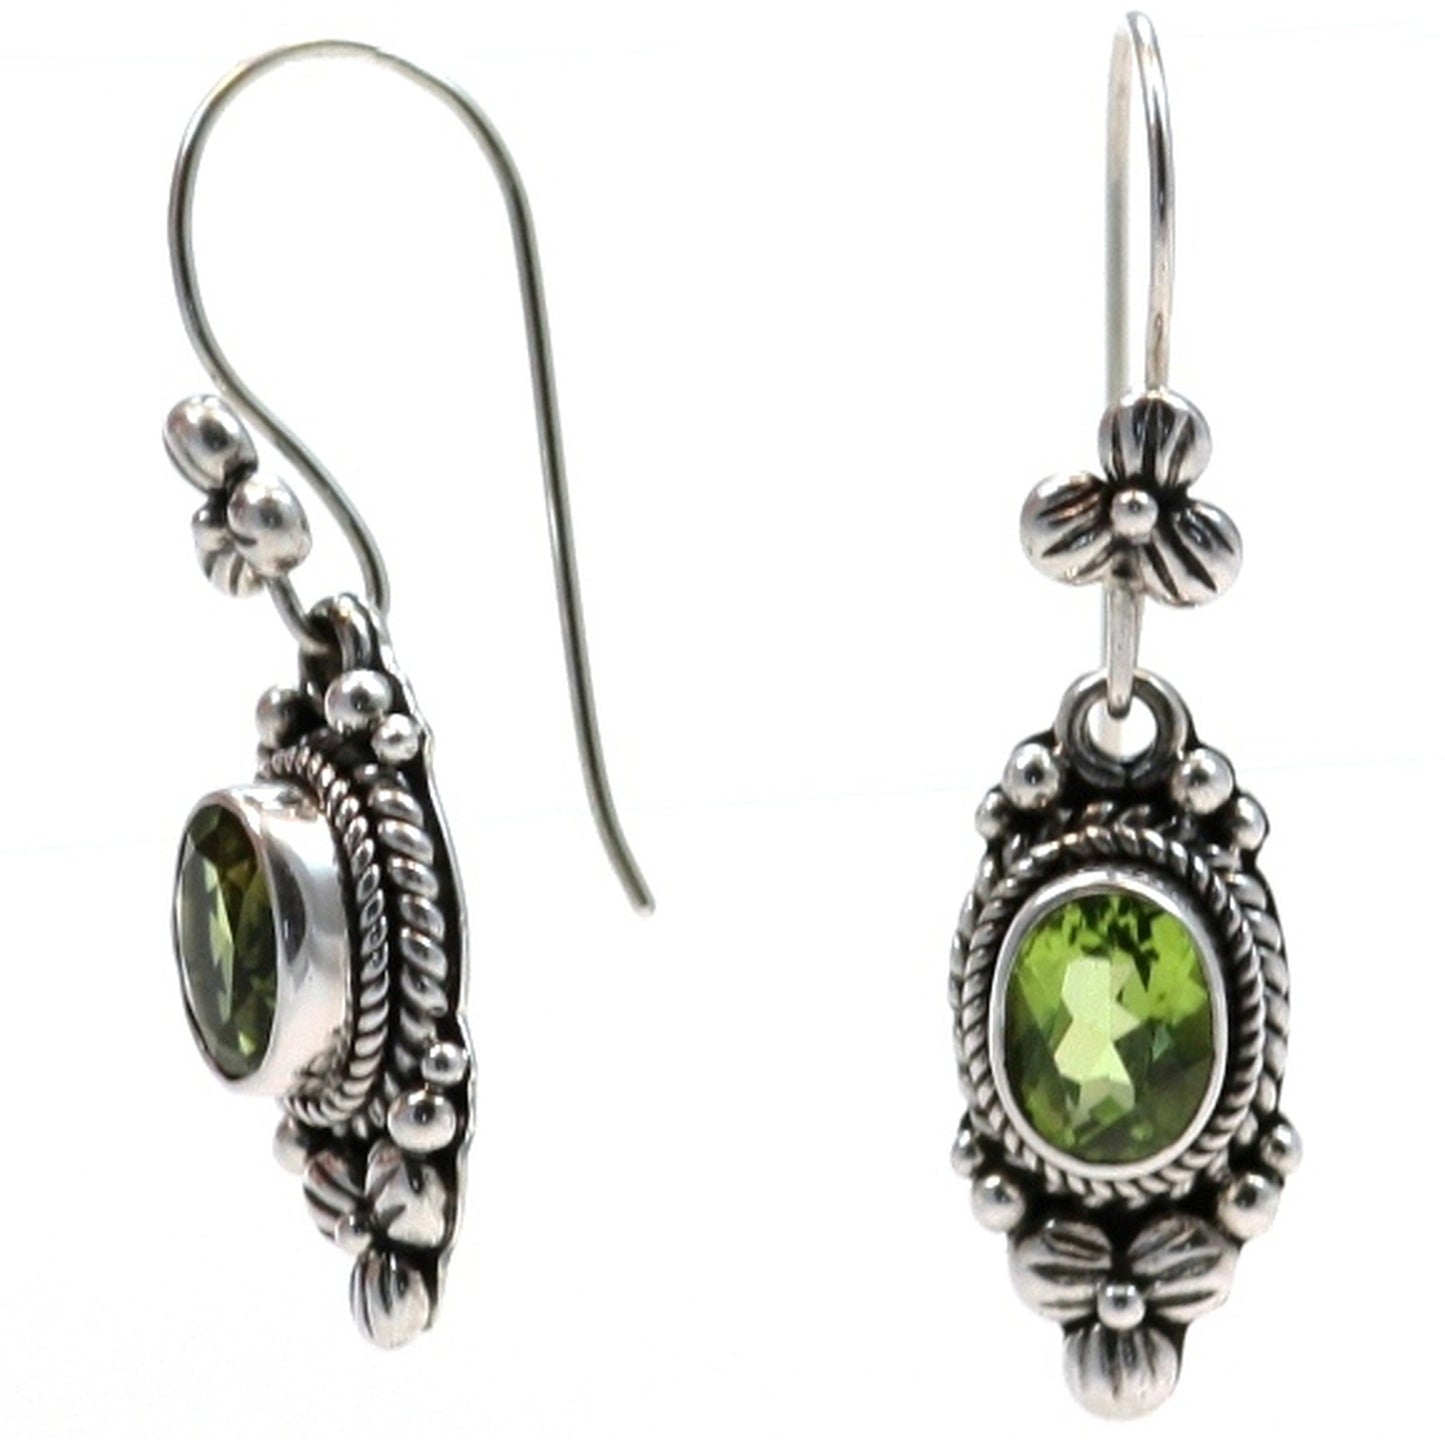 Silver wire drop earrings with floral design and peridot gemstones.